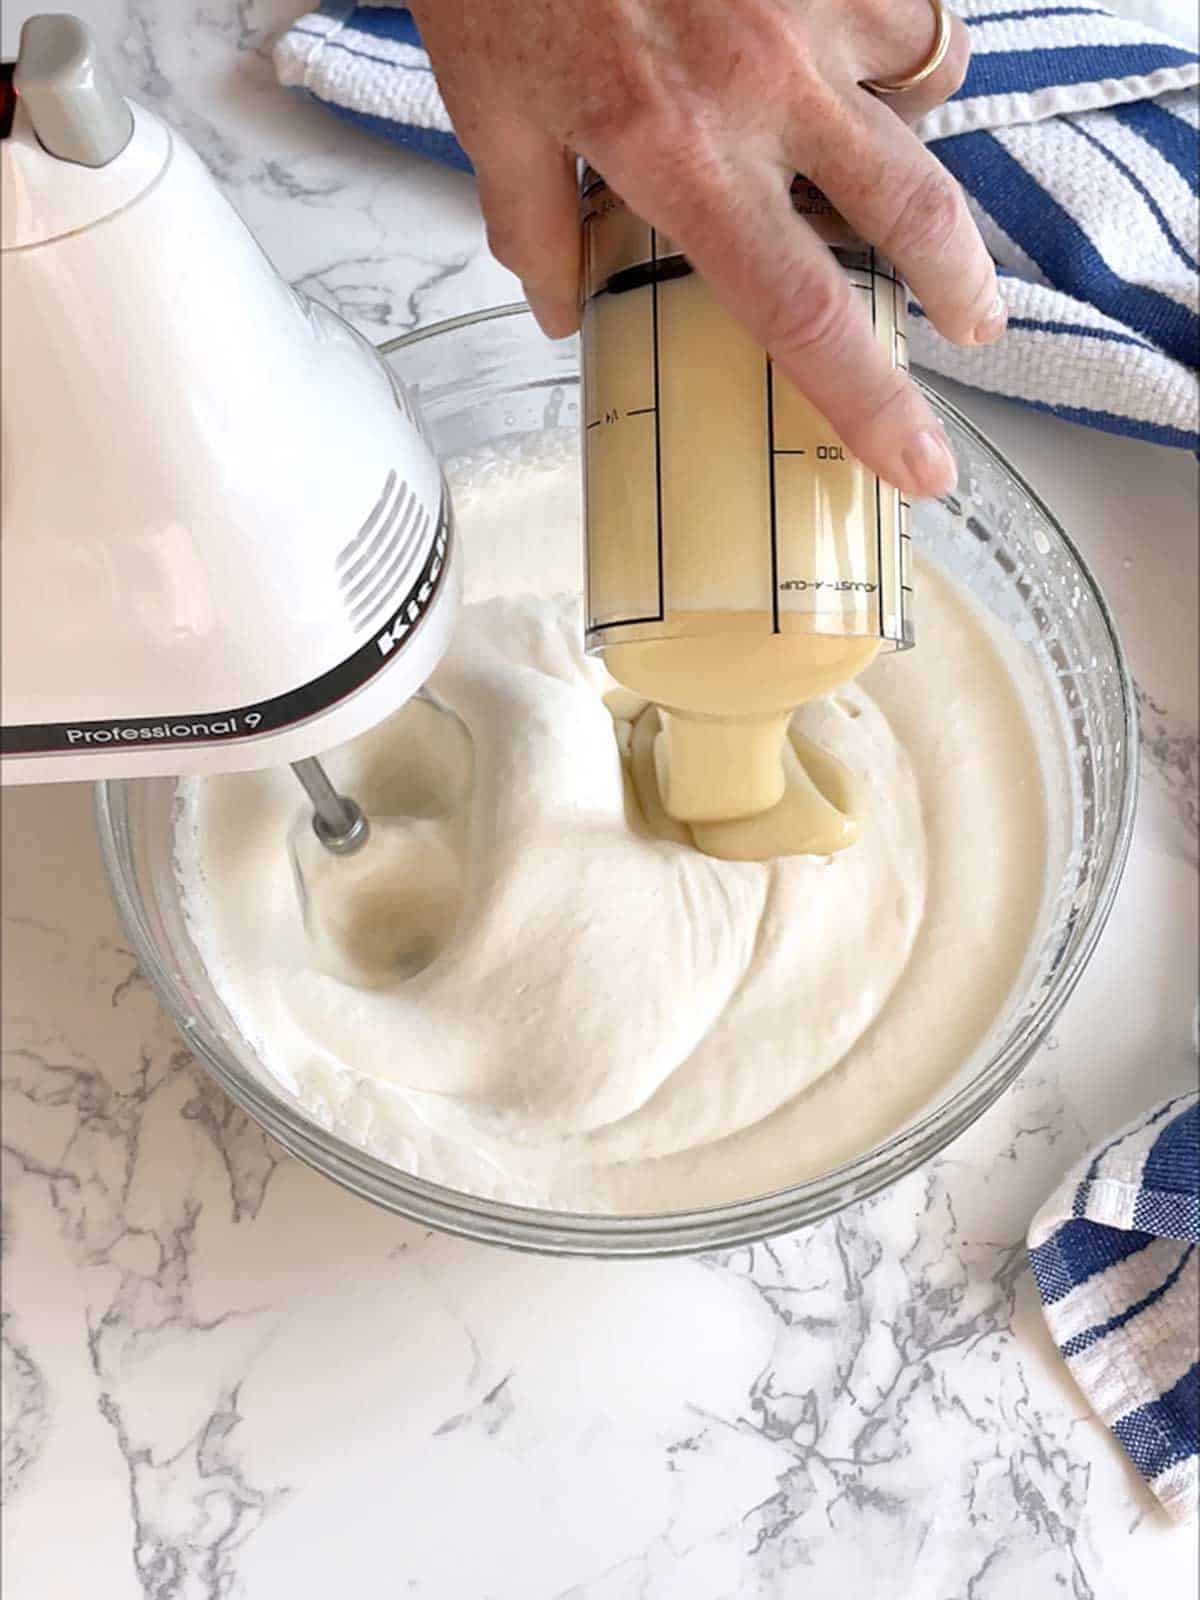 Adding sweetened condensed milk to the whipped cream.